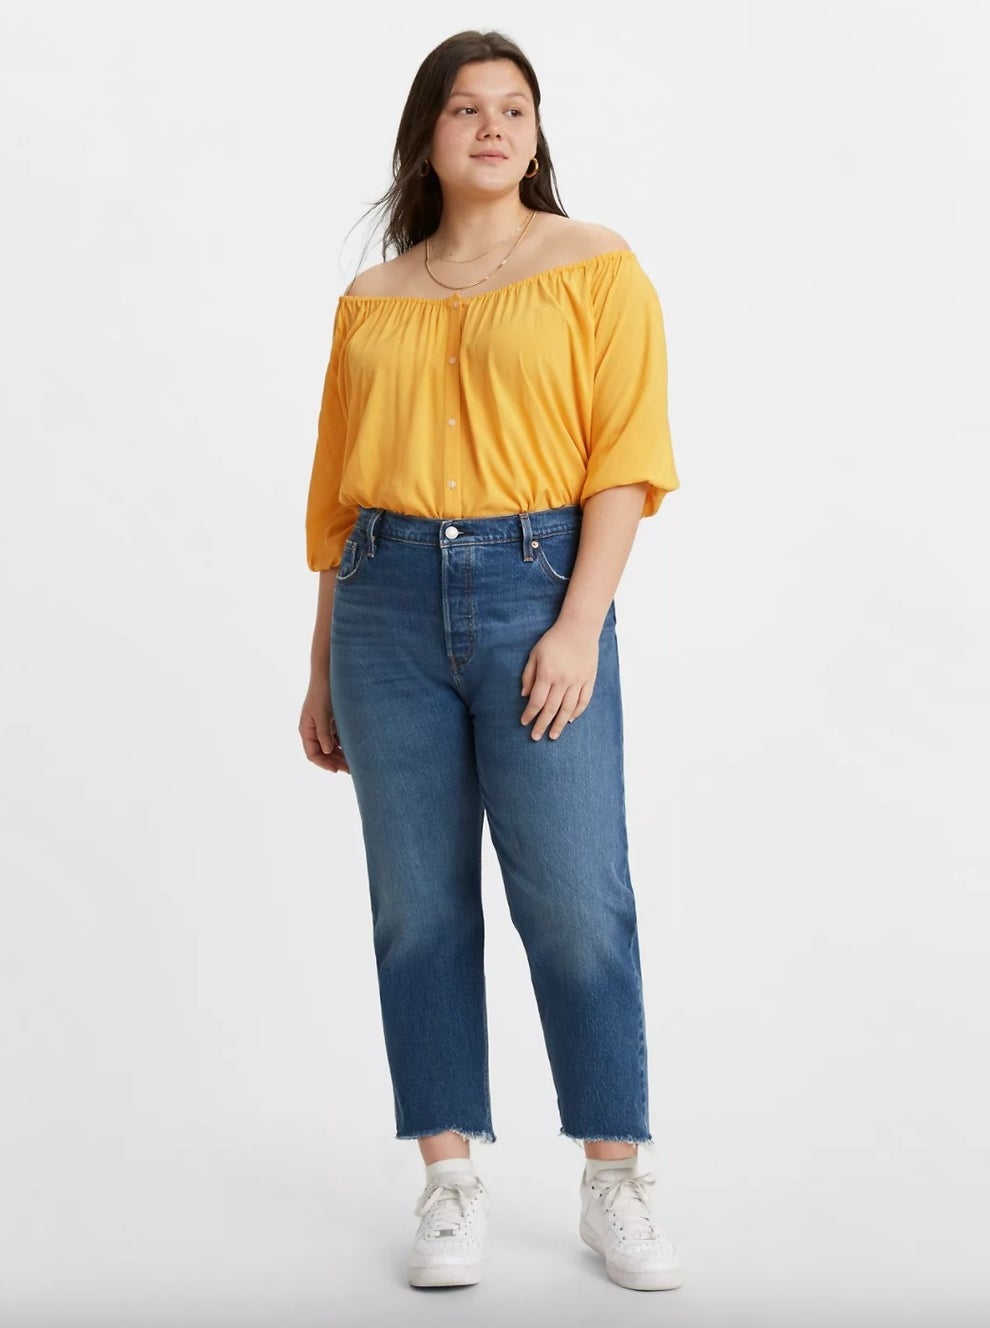 Levi's Warehouse Sale Is Up To 75% Off